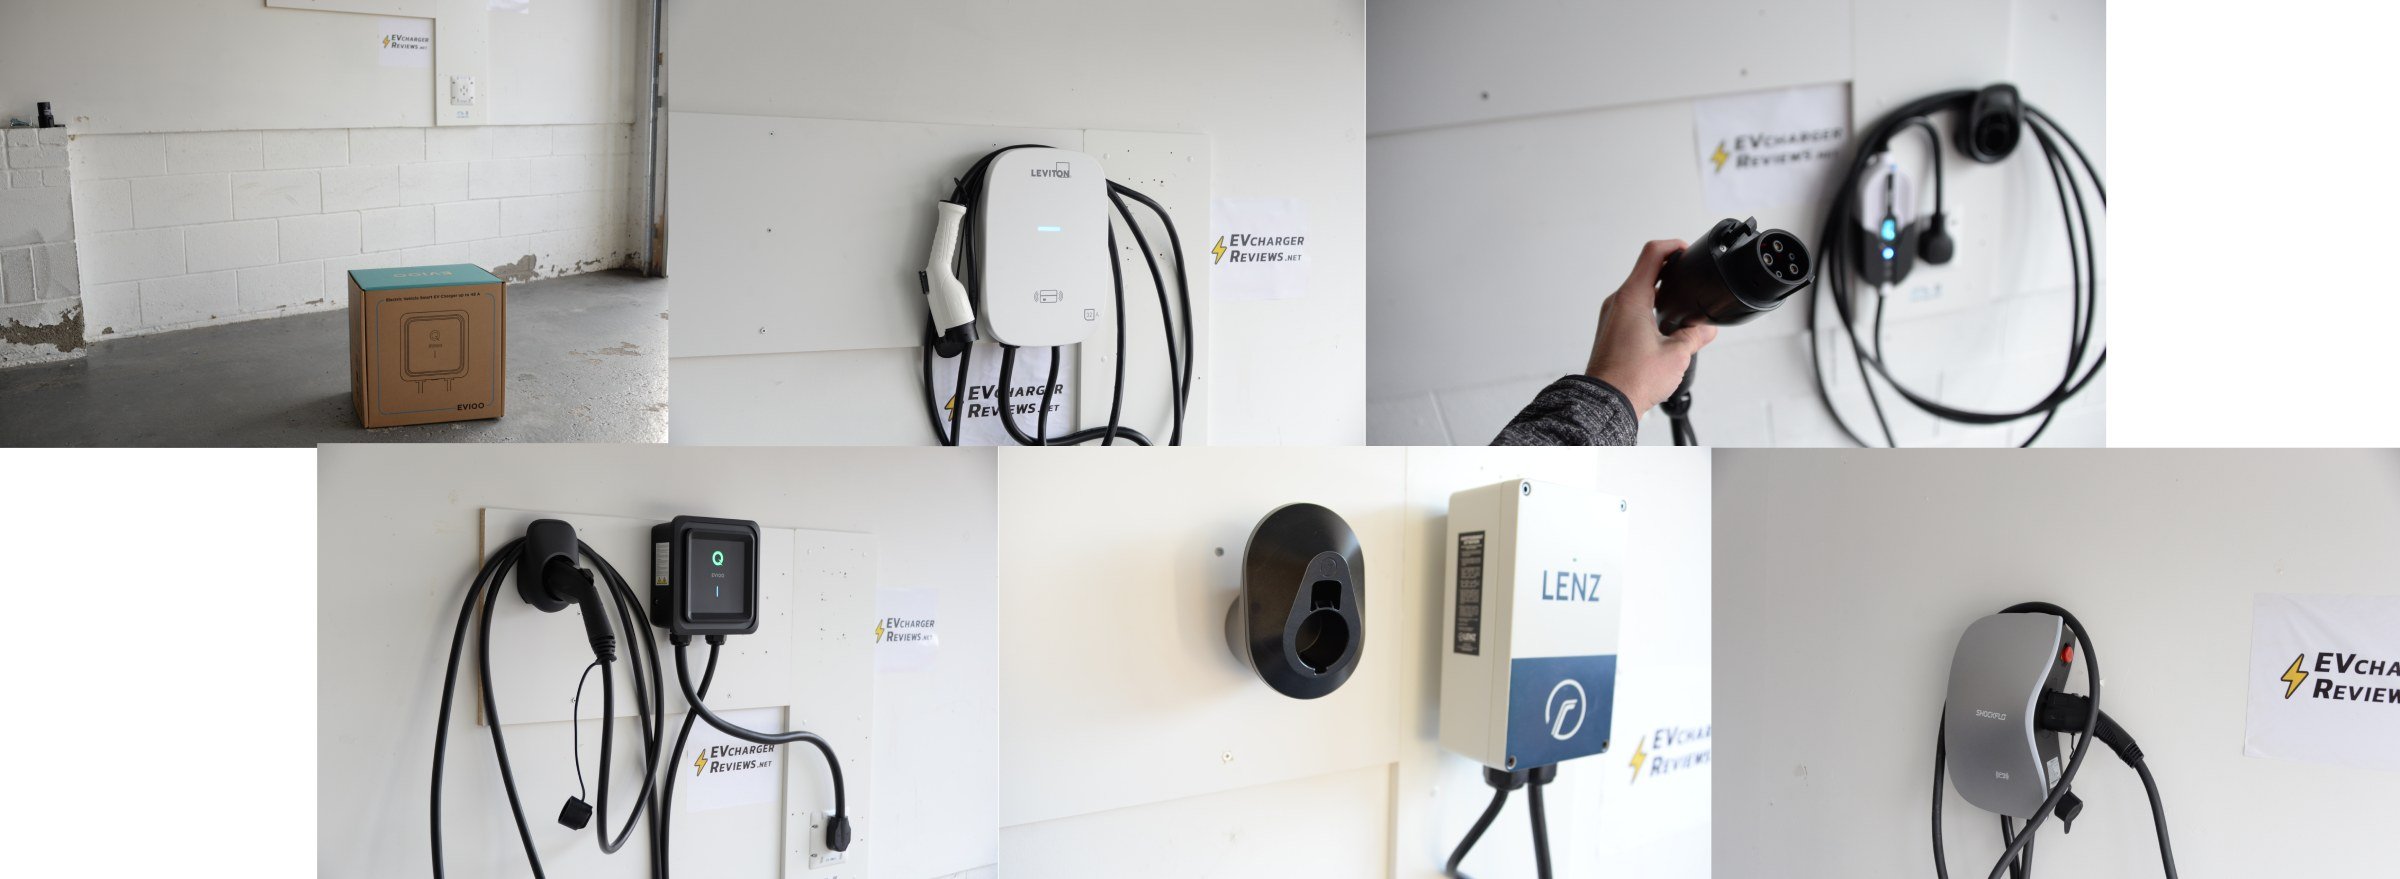 EVchargerReviews.net tests EV chargers in our garage lab for Bolt and other EVs